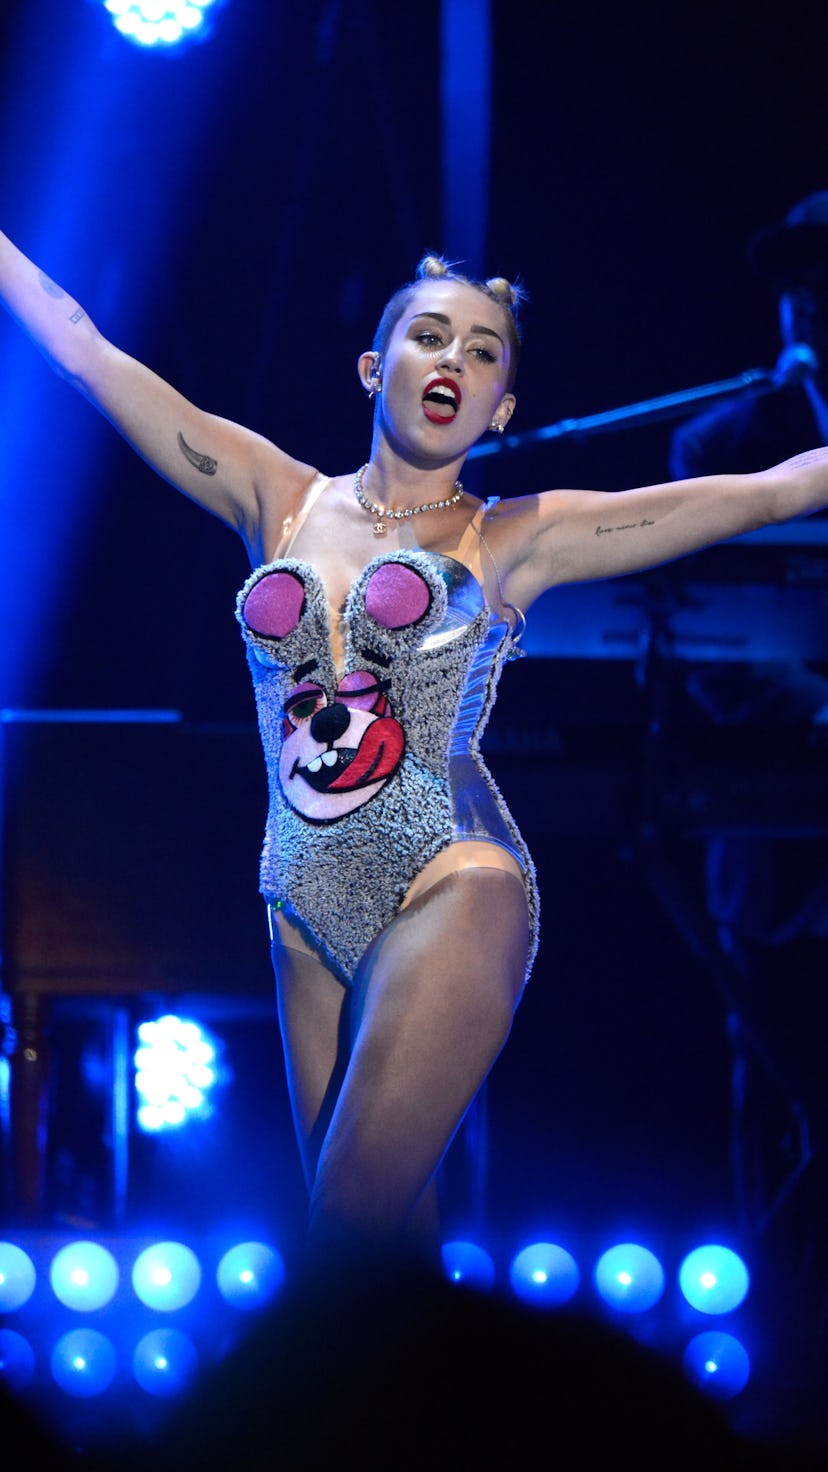 Miley Cyrus’ 13 Most Jaw-Dropping & Empowering Live Performances. Photo via Kevin Mazur/WireImage/Ge...